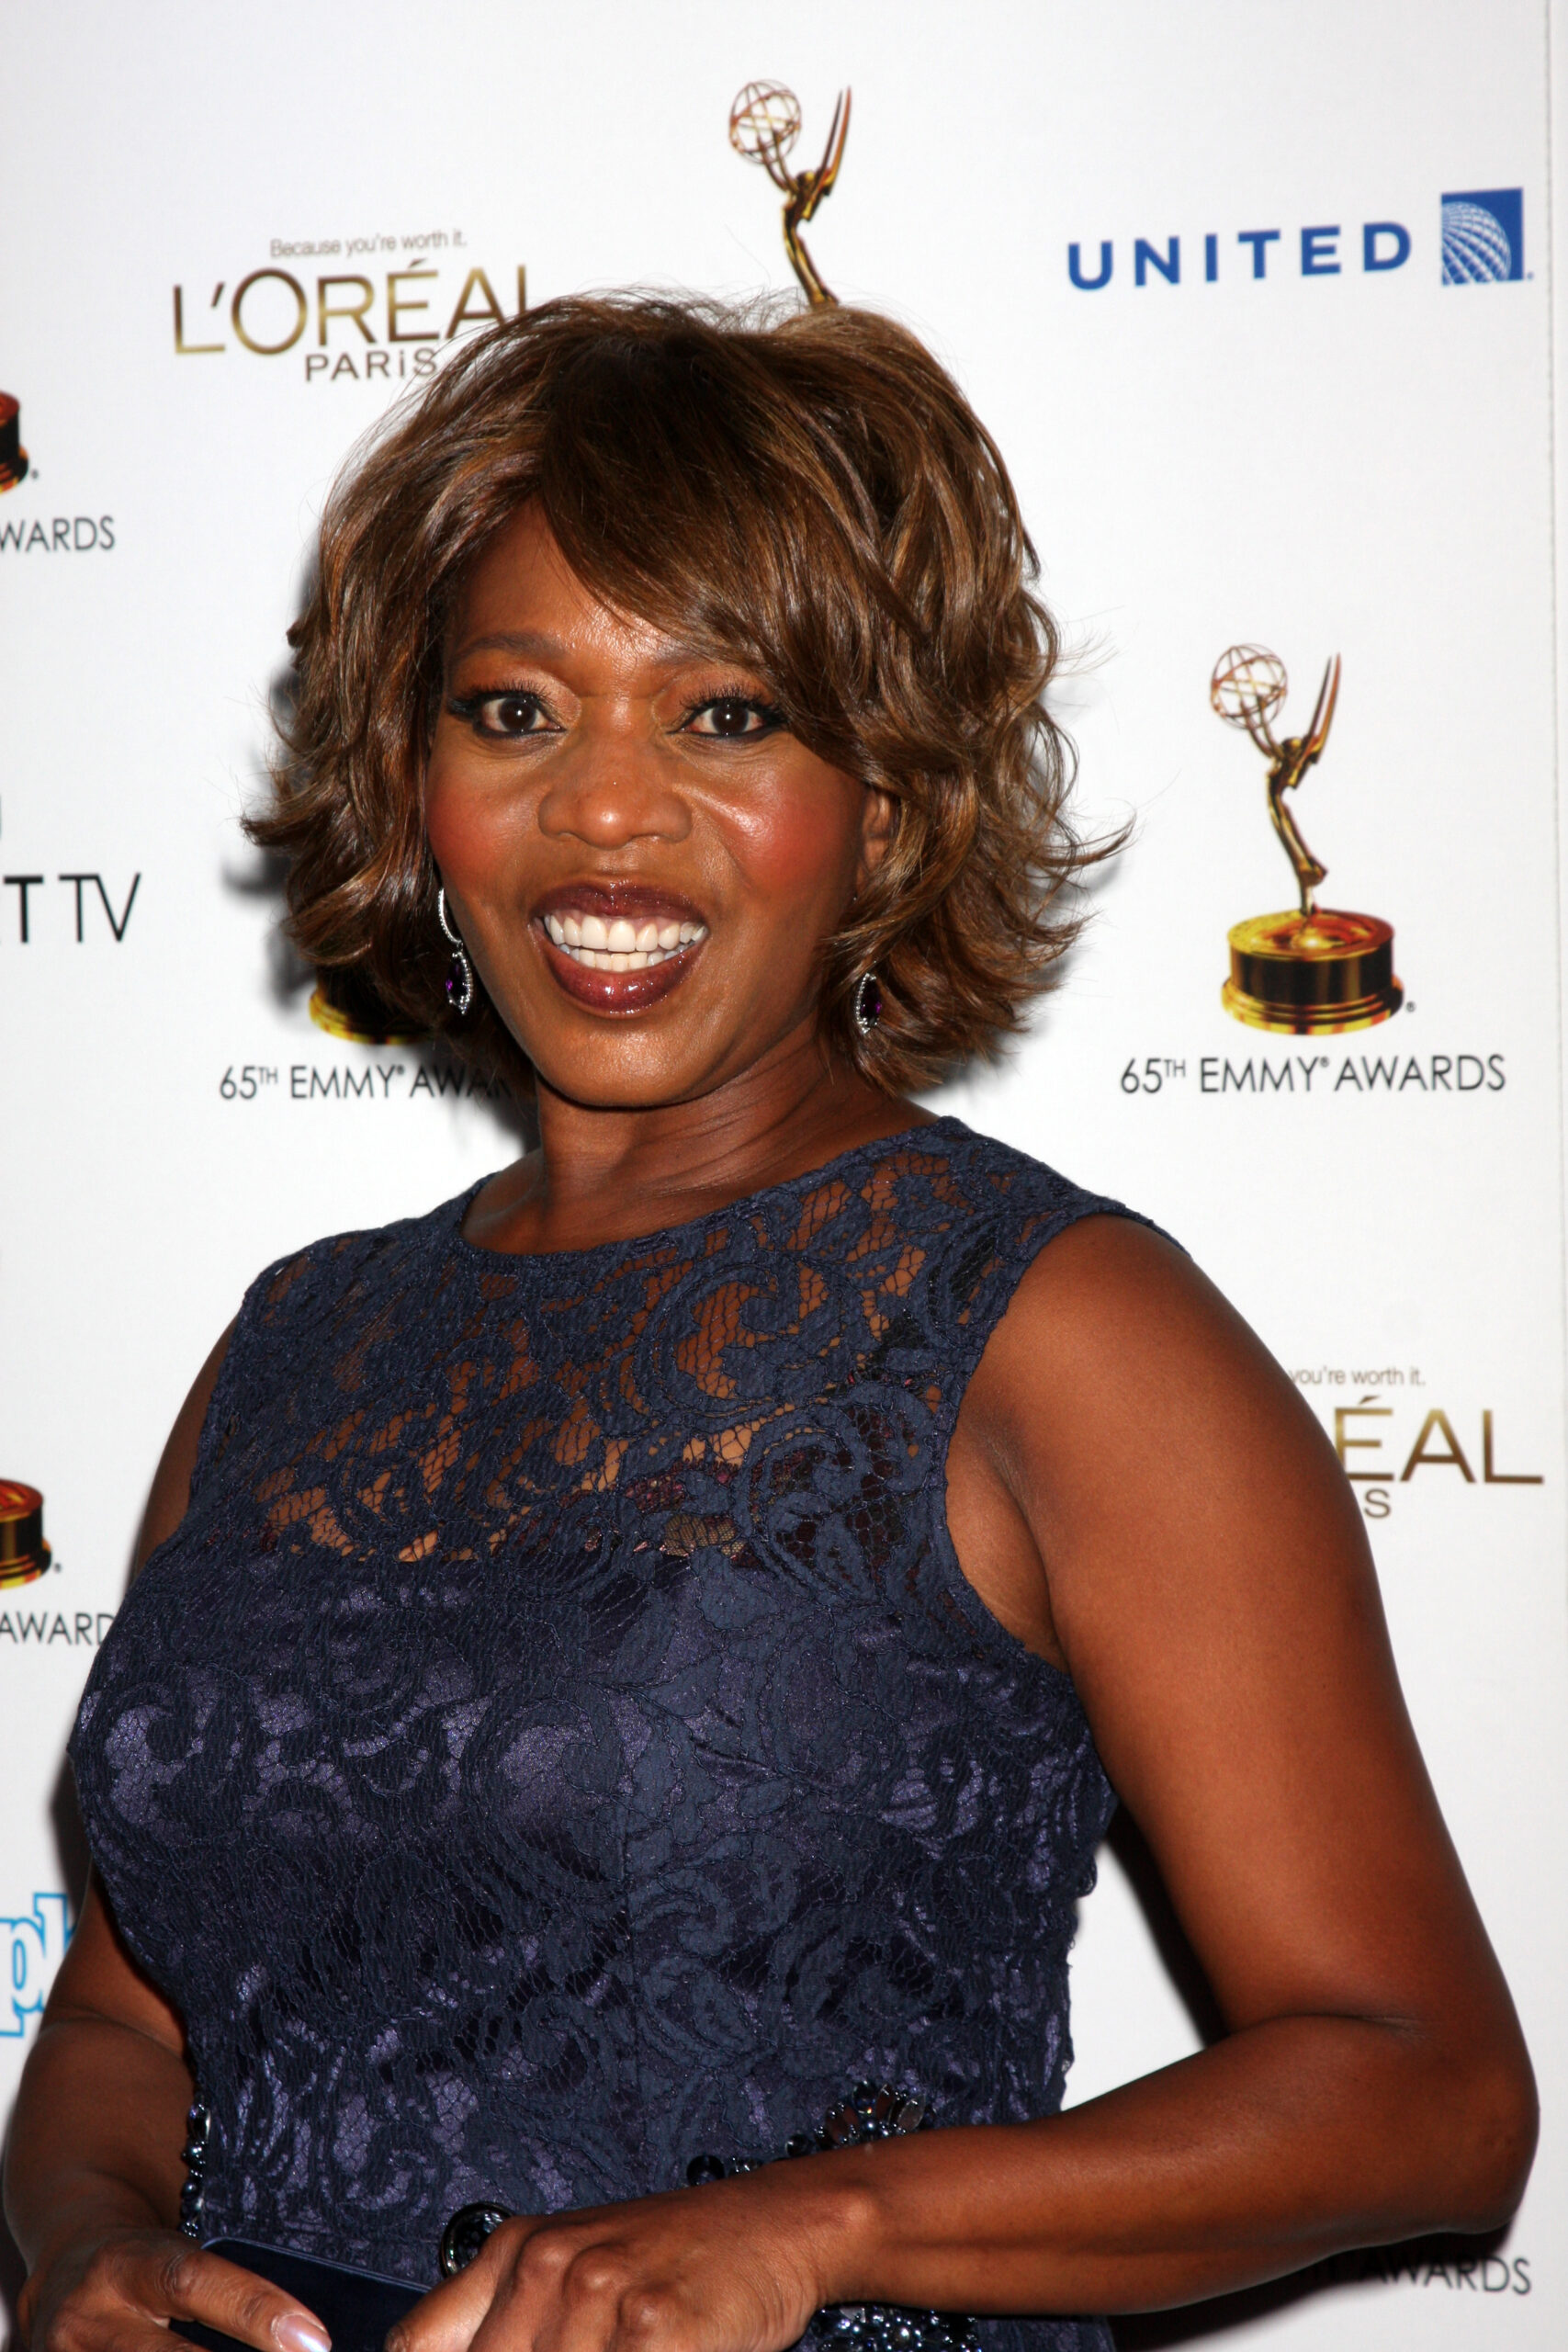 Alfre Woodard at the Emmys Performers Nominee Reception at Pacific Design Center on September 20, 2013 in West Hollywood, CA